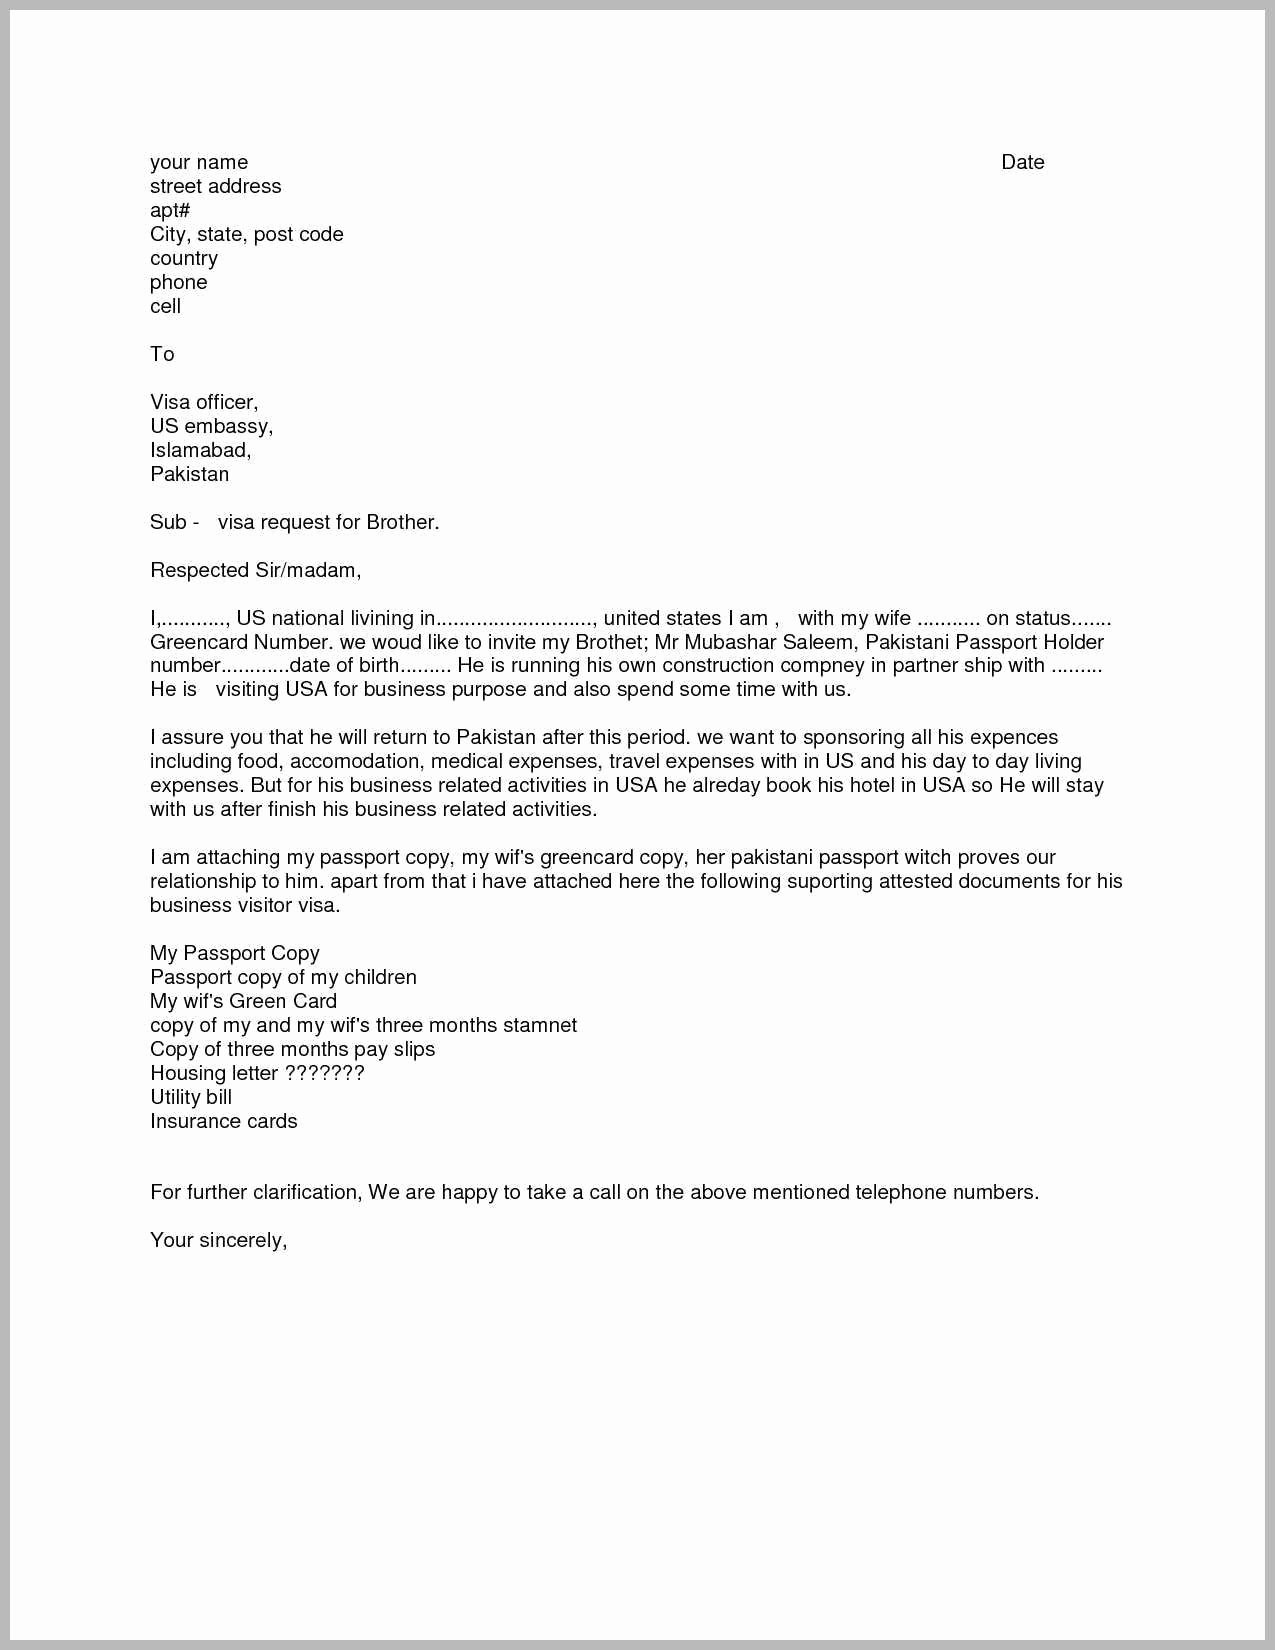 Eb1 Recommendation Letter Sample Lovely Business Letter without Letterhead Archives